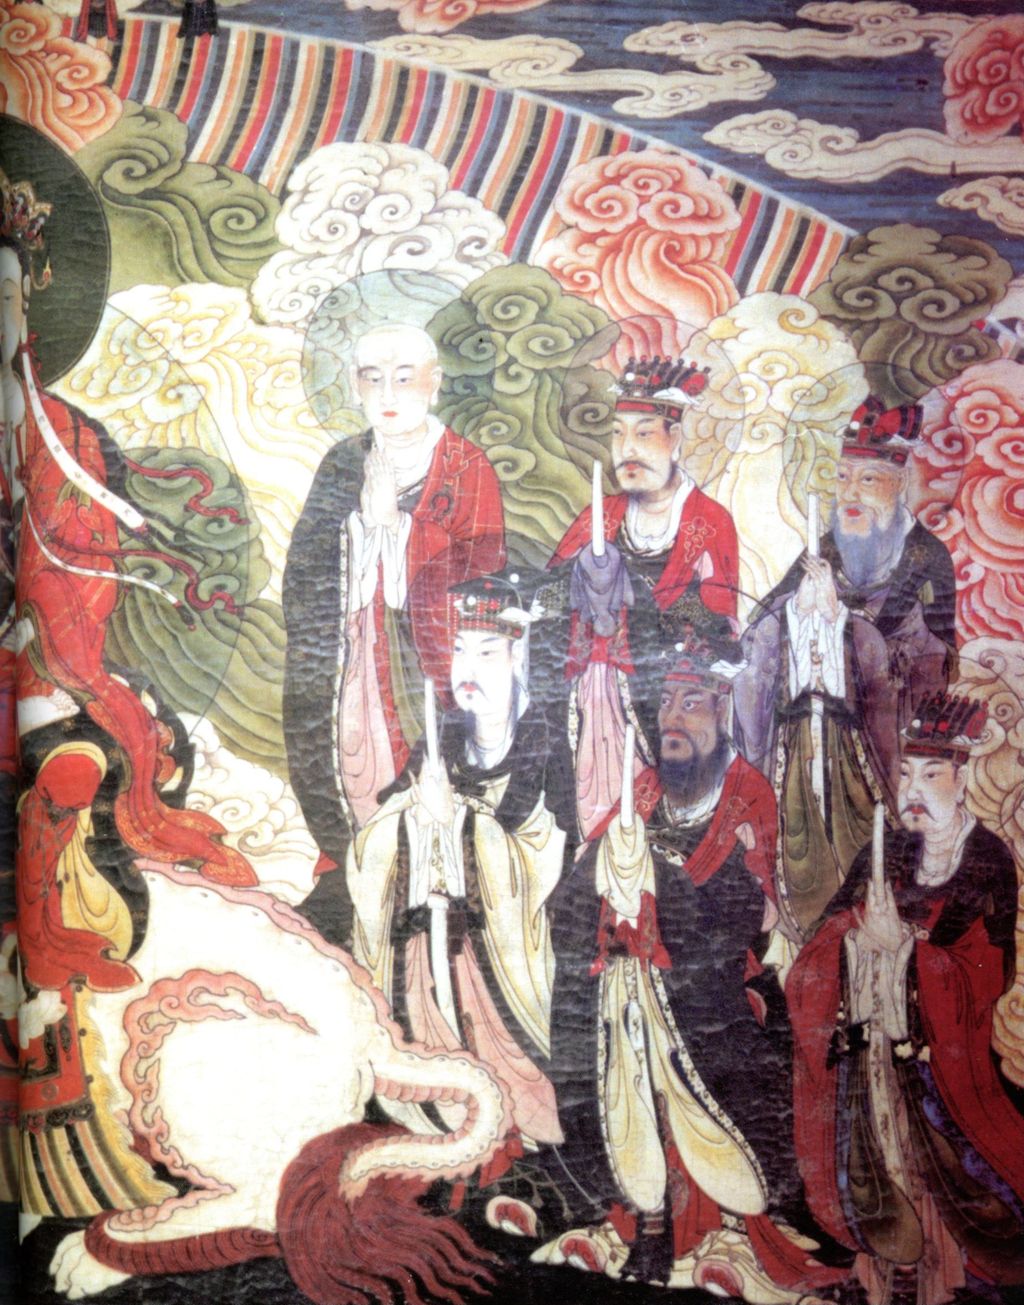 Miniature of Dizang Bodhisattva with the Ten Kings of Hell Mural from Zhihua Hall (Zhihuadian, Hall of Transforming Wisdom), Elder Min and five of Ten Kings of Hell